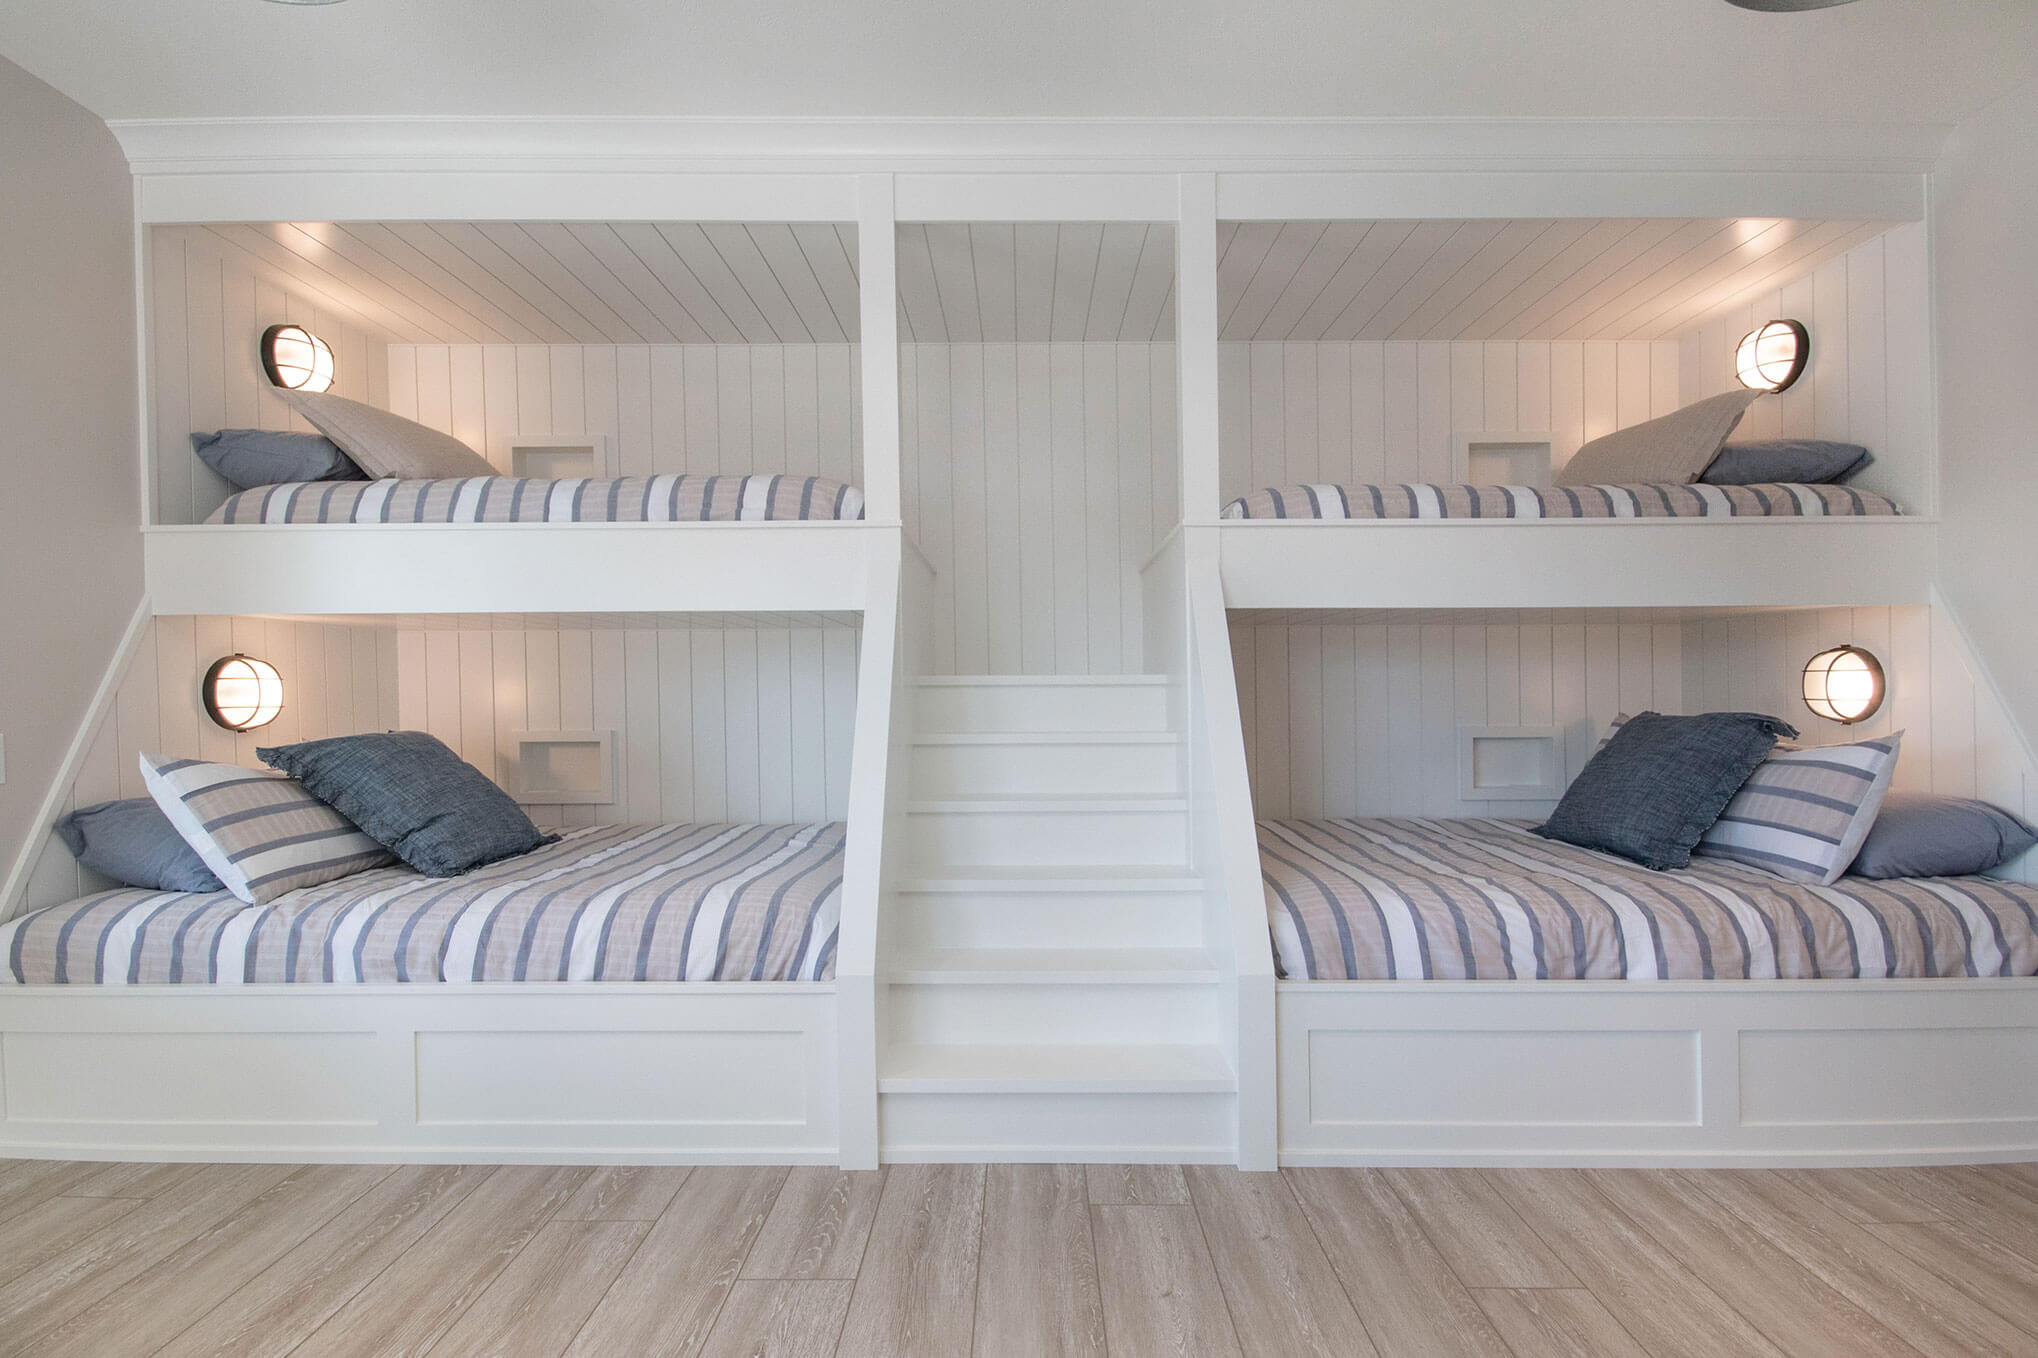 25 Bunk Bed Ideas For Small Bedrooms, 4 Bunk Bed Plans